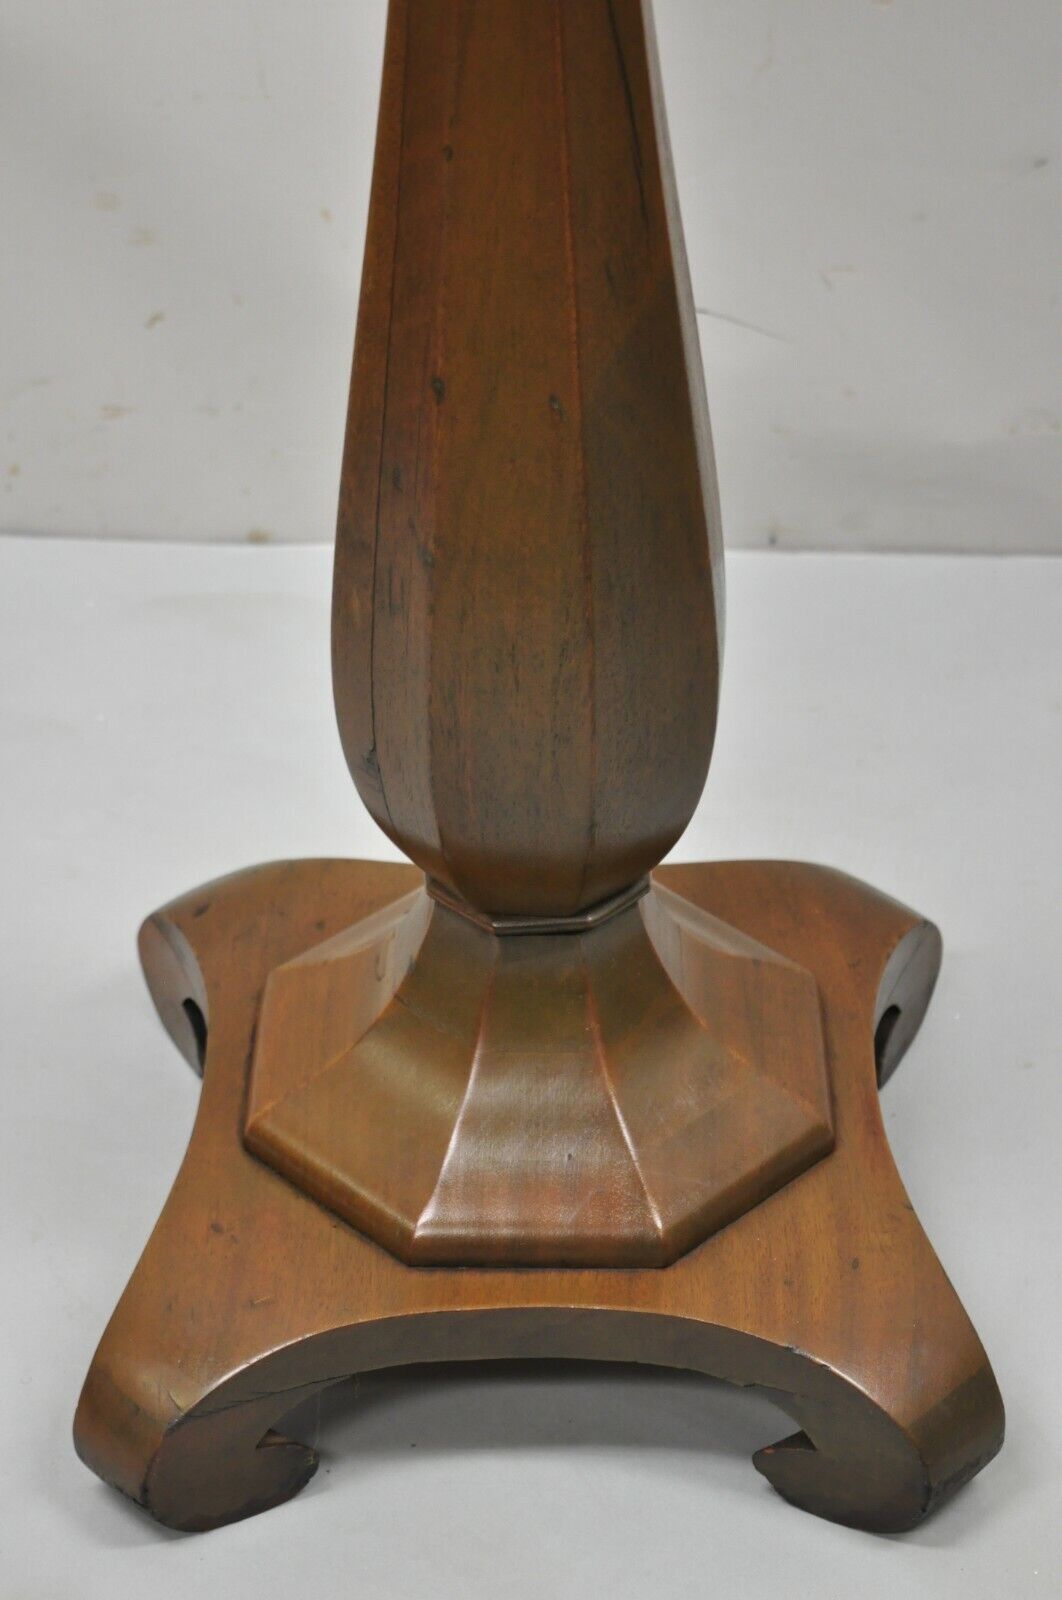 Antique American Empire Carved Mahogany Octagonal Pedestal Column Plant Stand